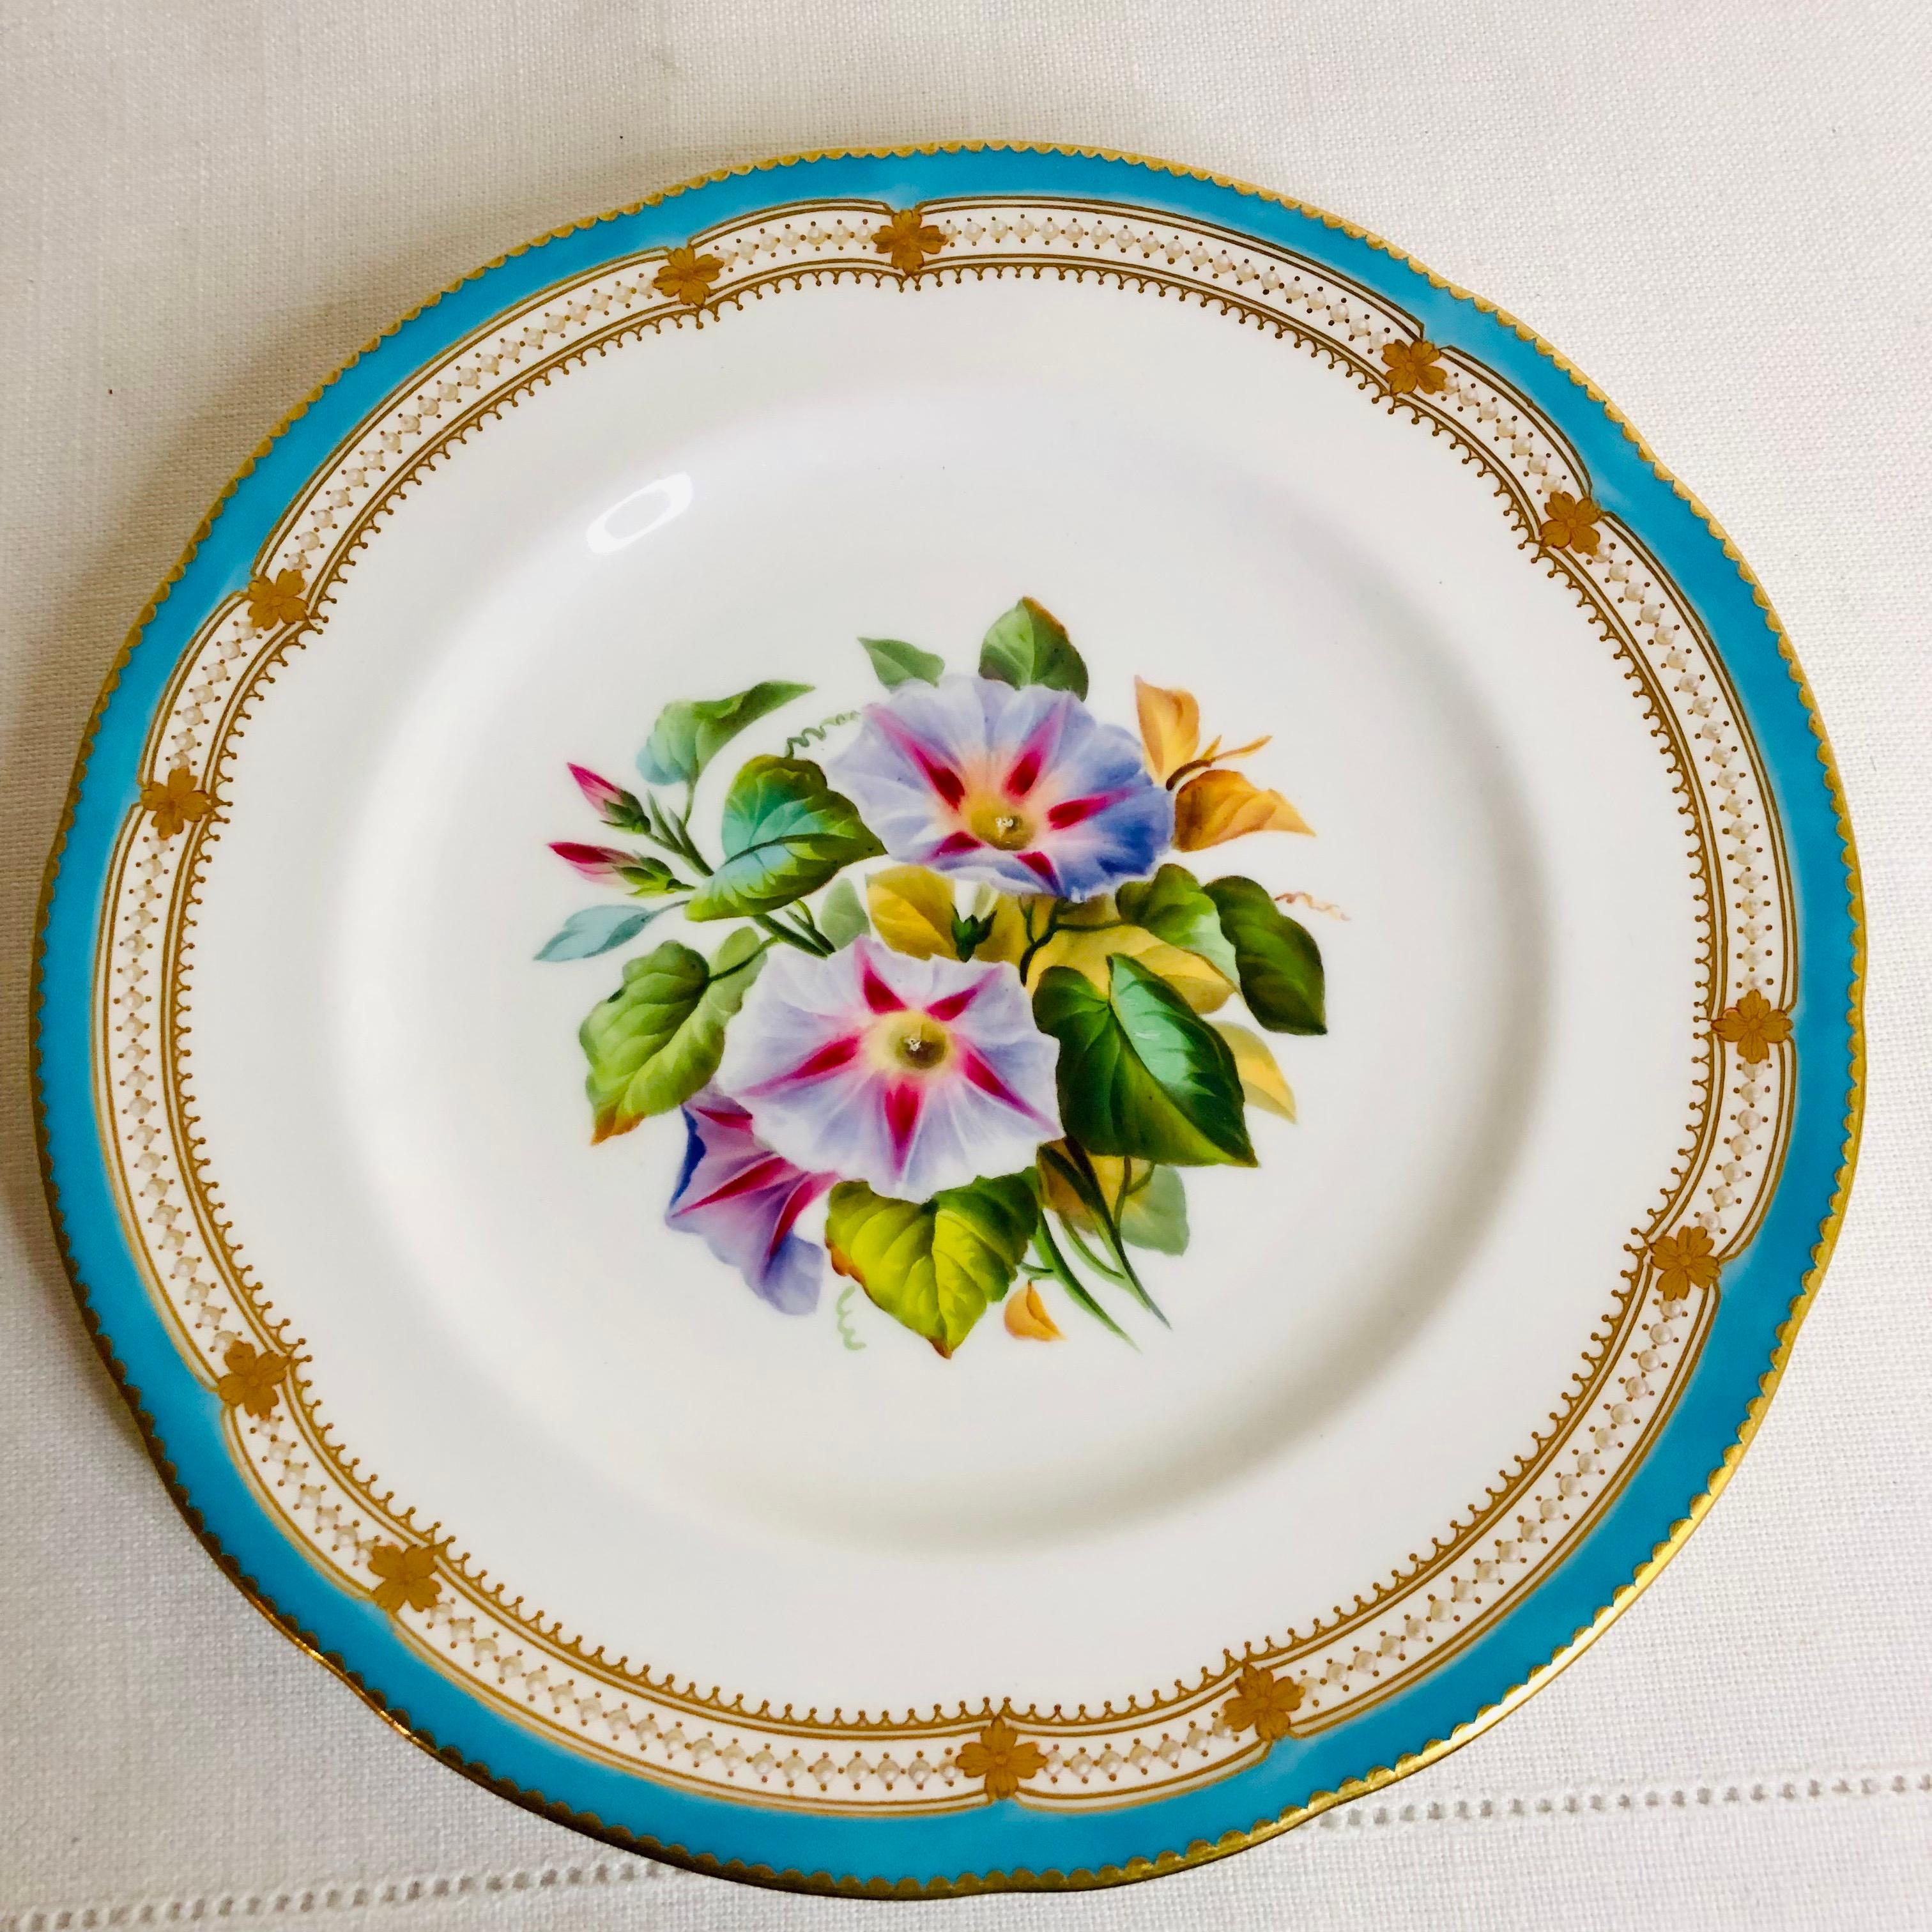 Set of 16 Rare Minton Plates Each Hand-Painted with a Different Flower Bouquet 13